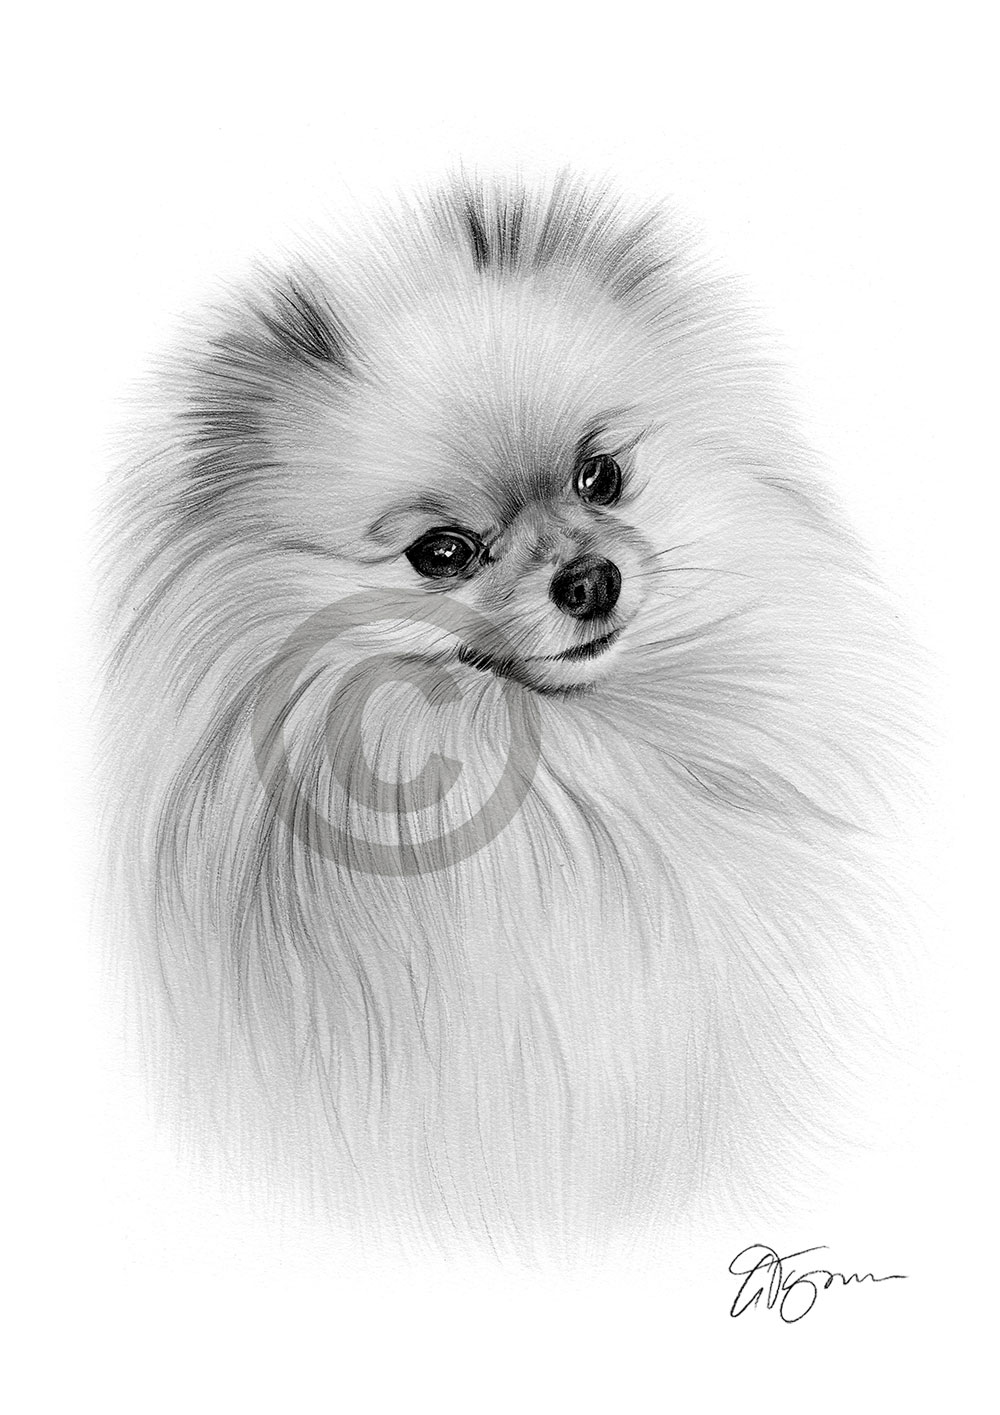 Pencil drawing of a young Pomeranian by artist Gary Tymon